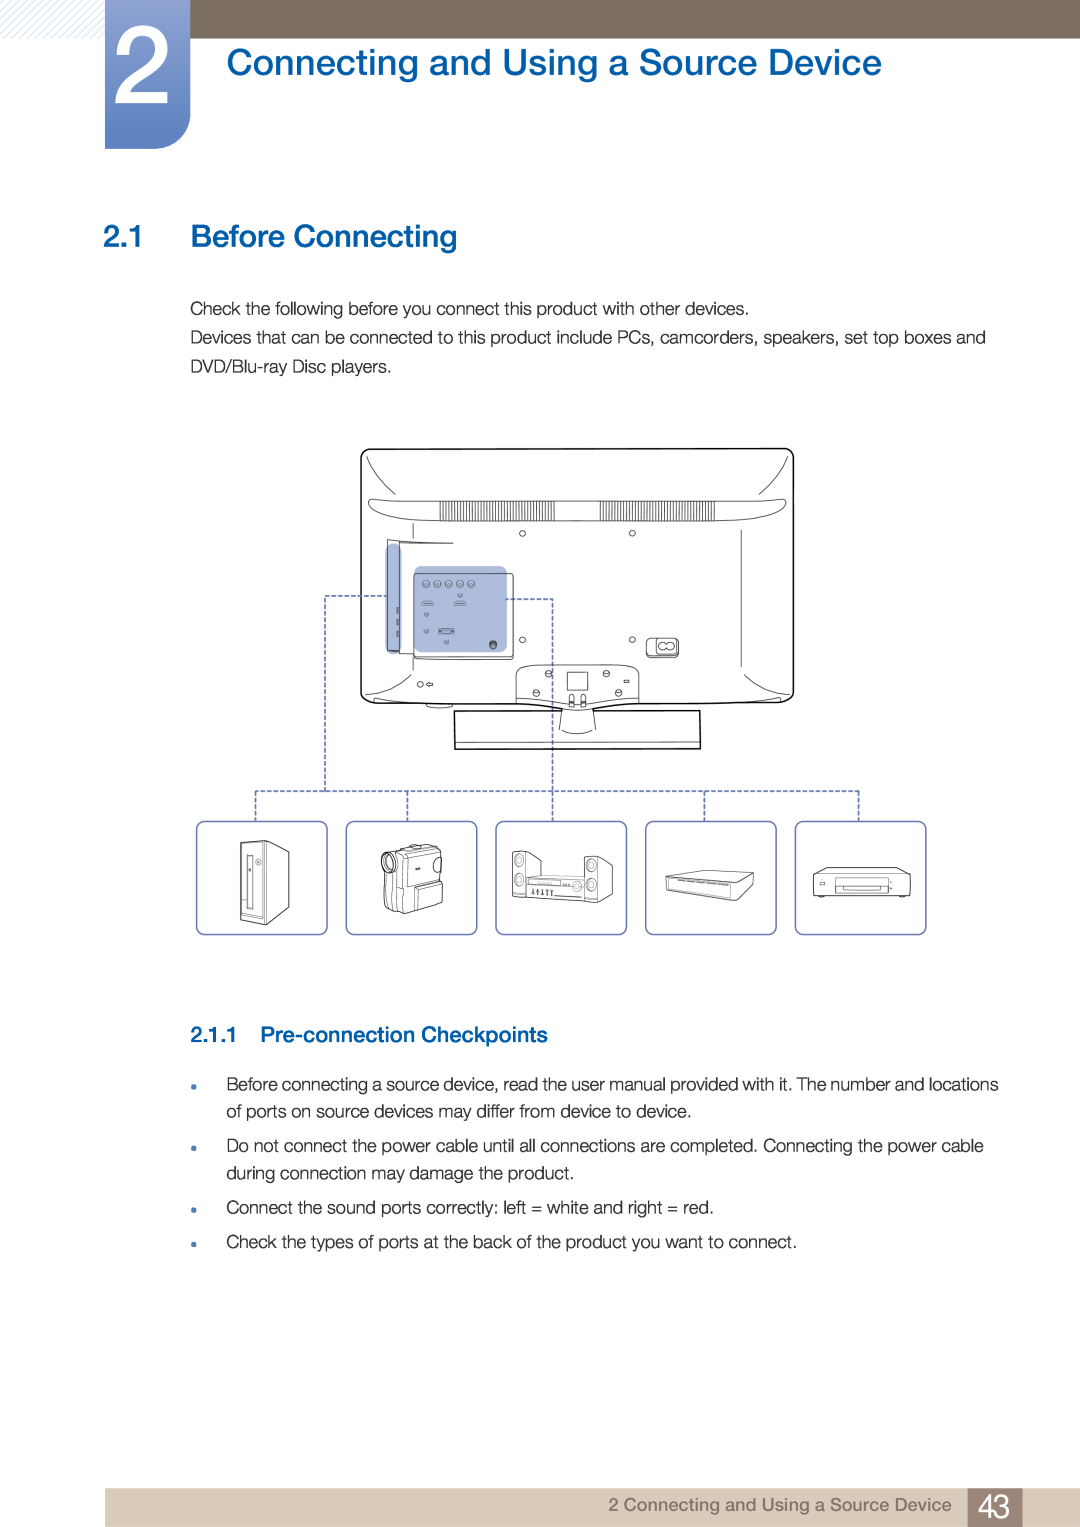 Samsung BN4600281A-01, BN46-00281A-01 Connecting and Using a Source Device, Before Connecting, Pre-connection Checkpoints 